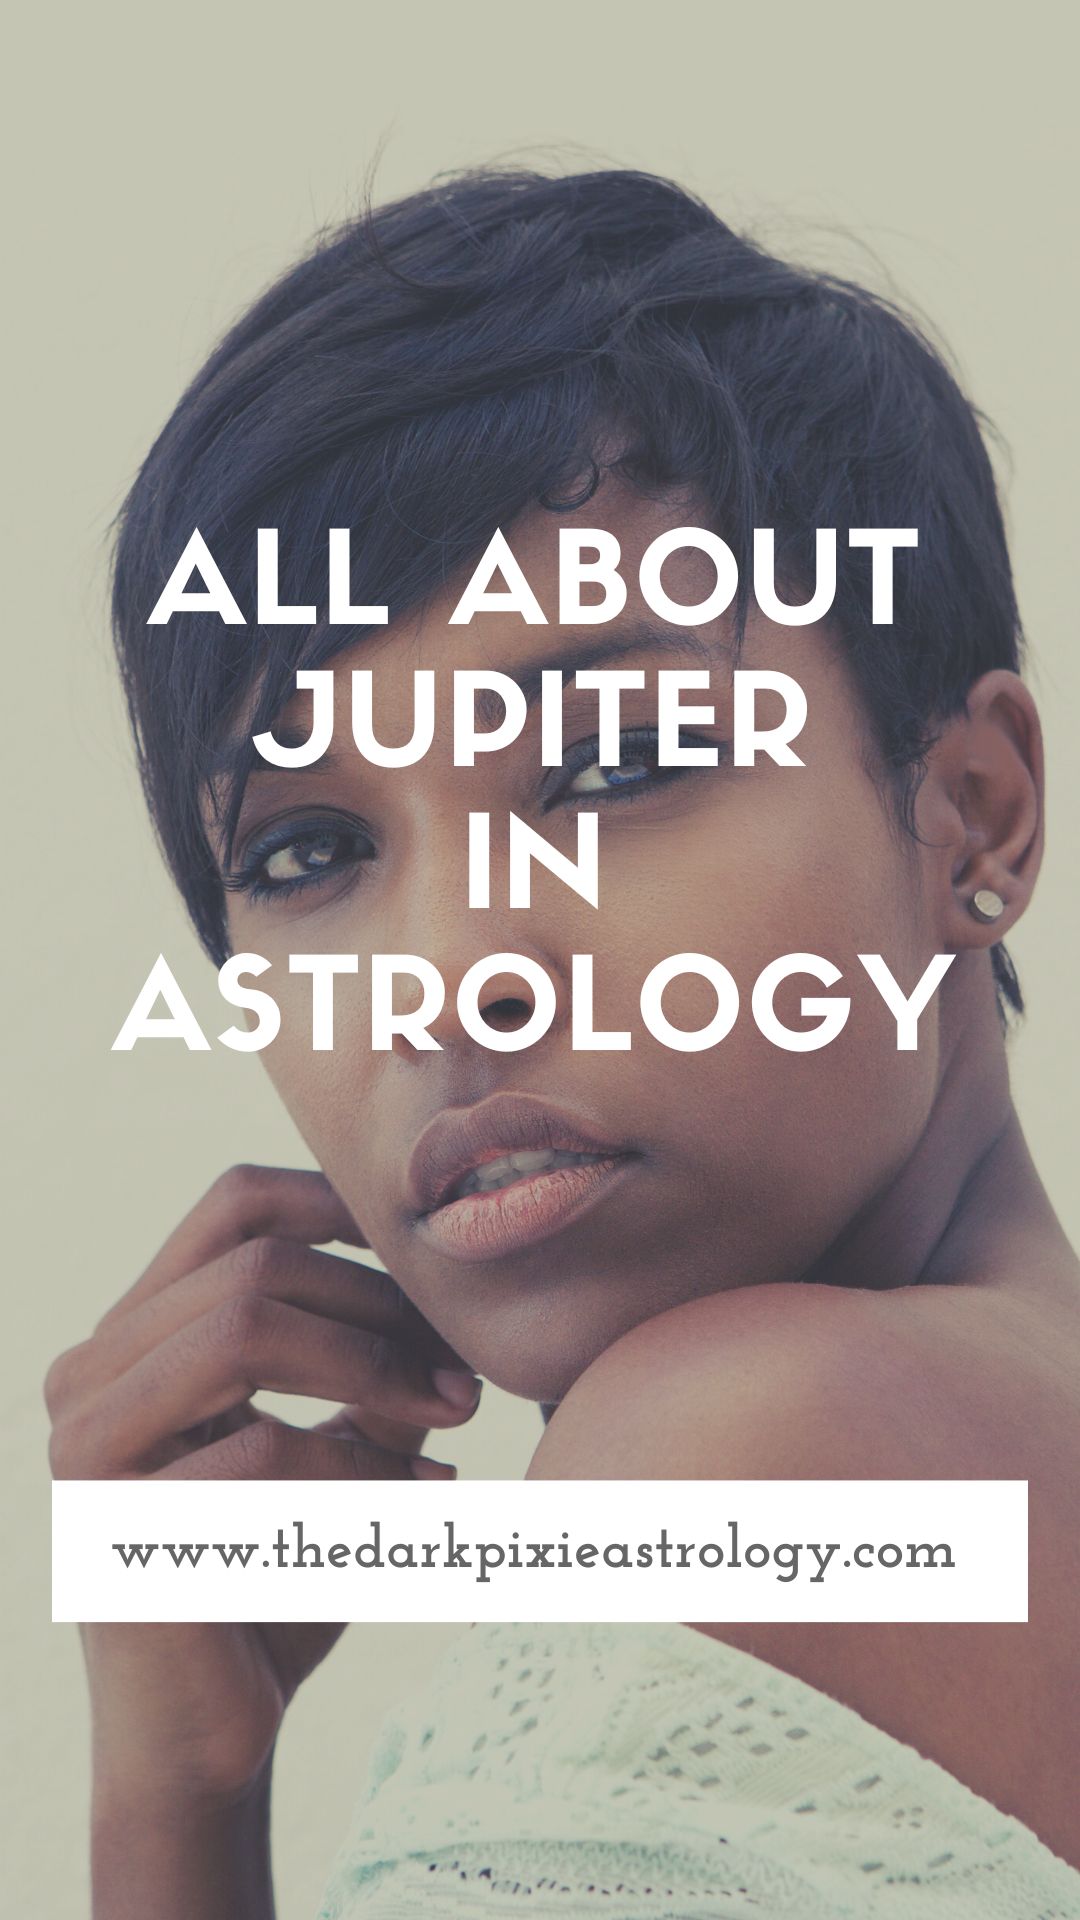 All About Jupiter in Astrology - The Dark Pixie Astrology